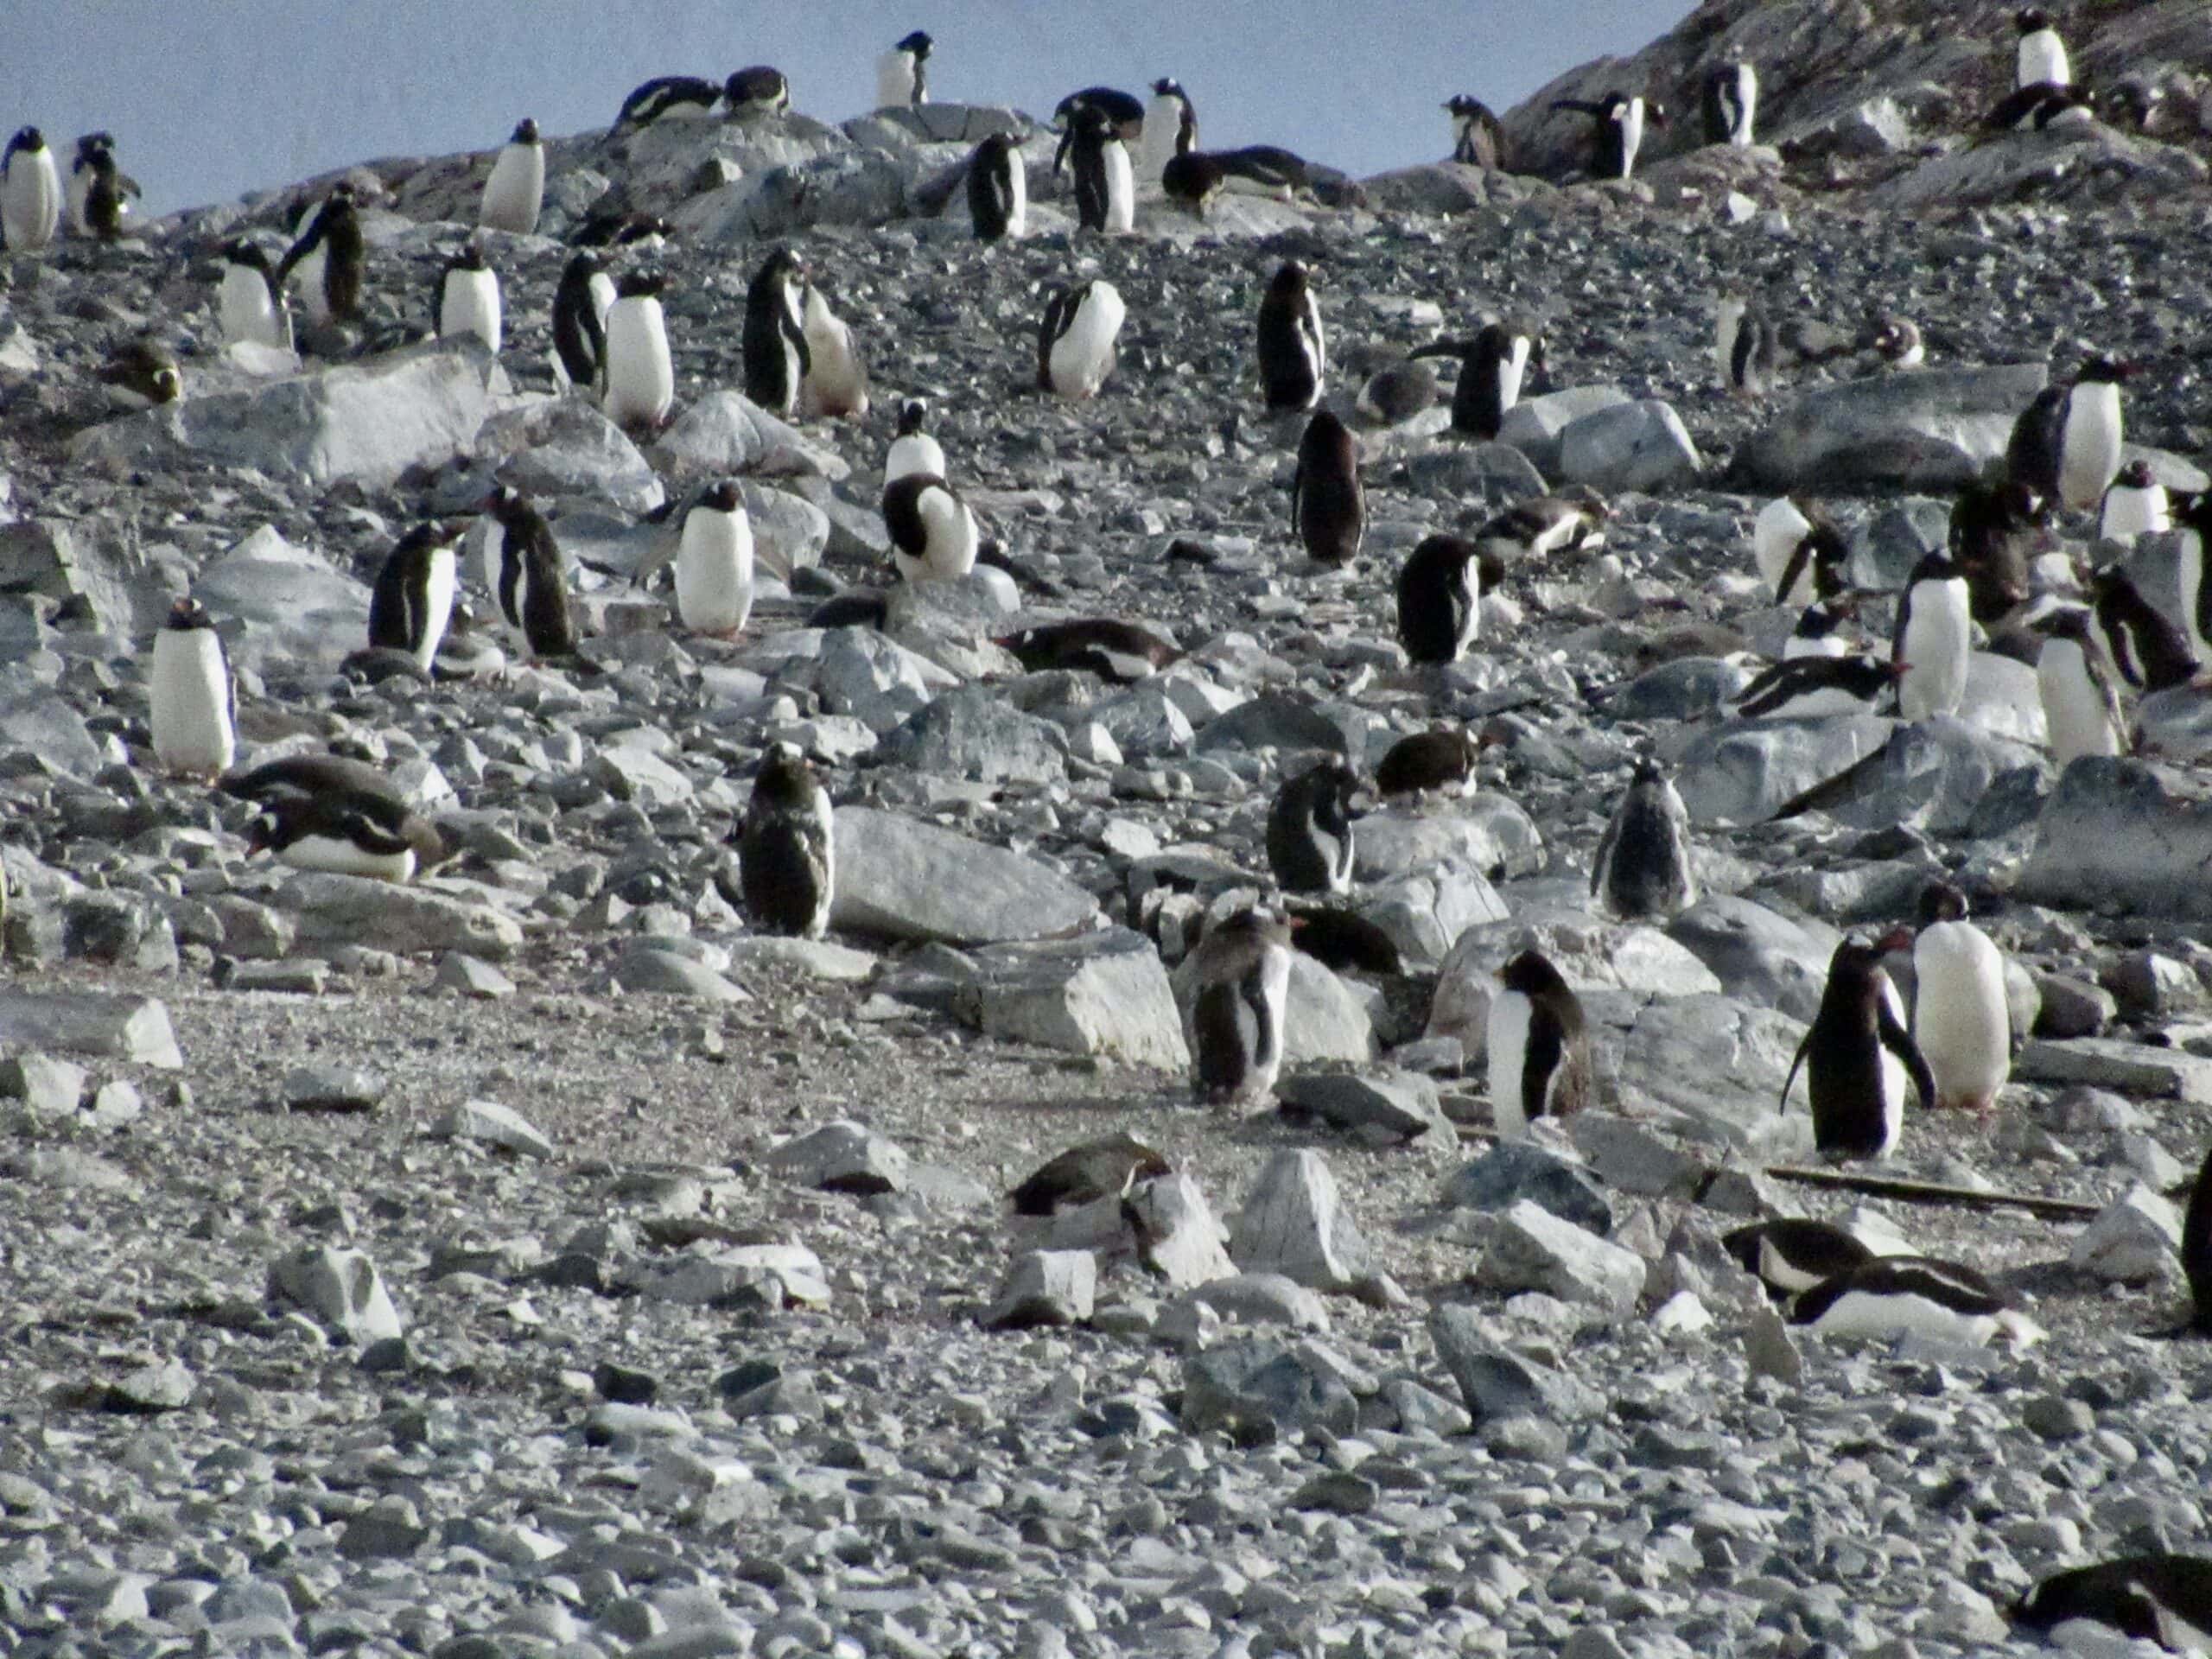 Gentoo penguins on the shore of Cuverville Island